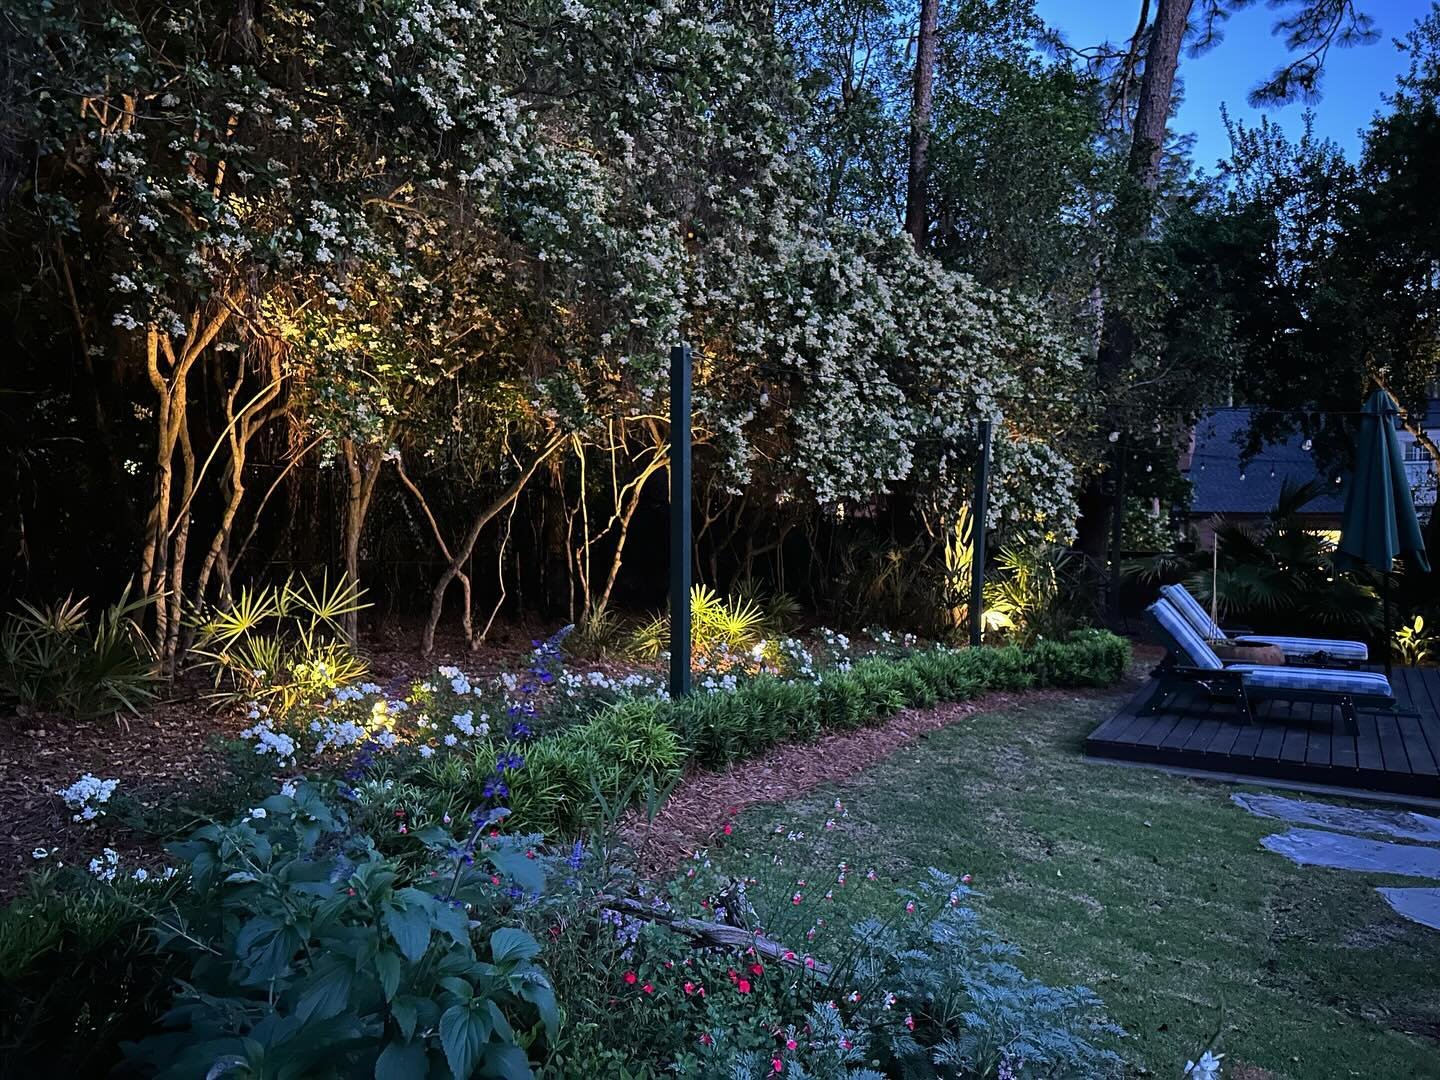 I just can&rsquo;t seem to capture the beauty of the 8 o&rsquo;clock hour in our backyard. The drift roses and privet are in full bloom now, and I am in bliss.